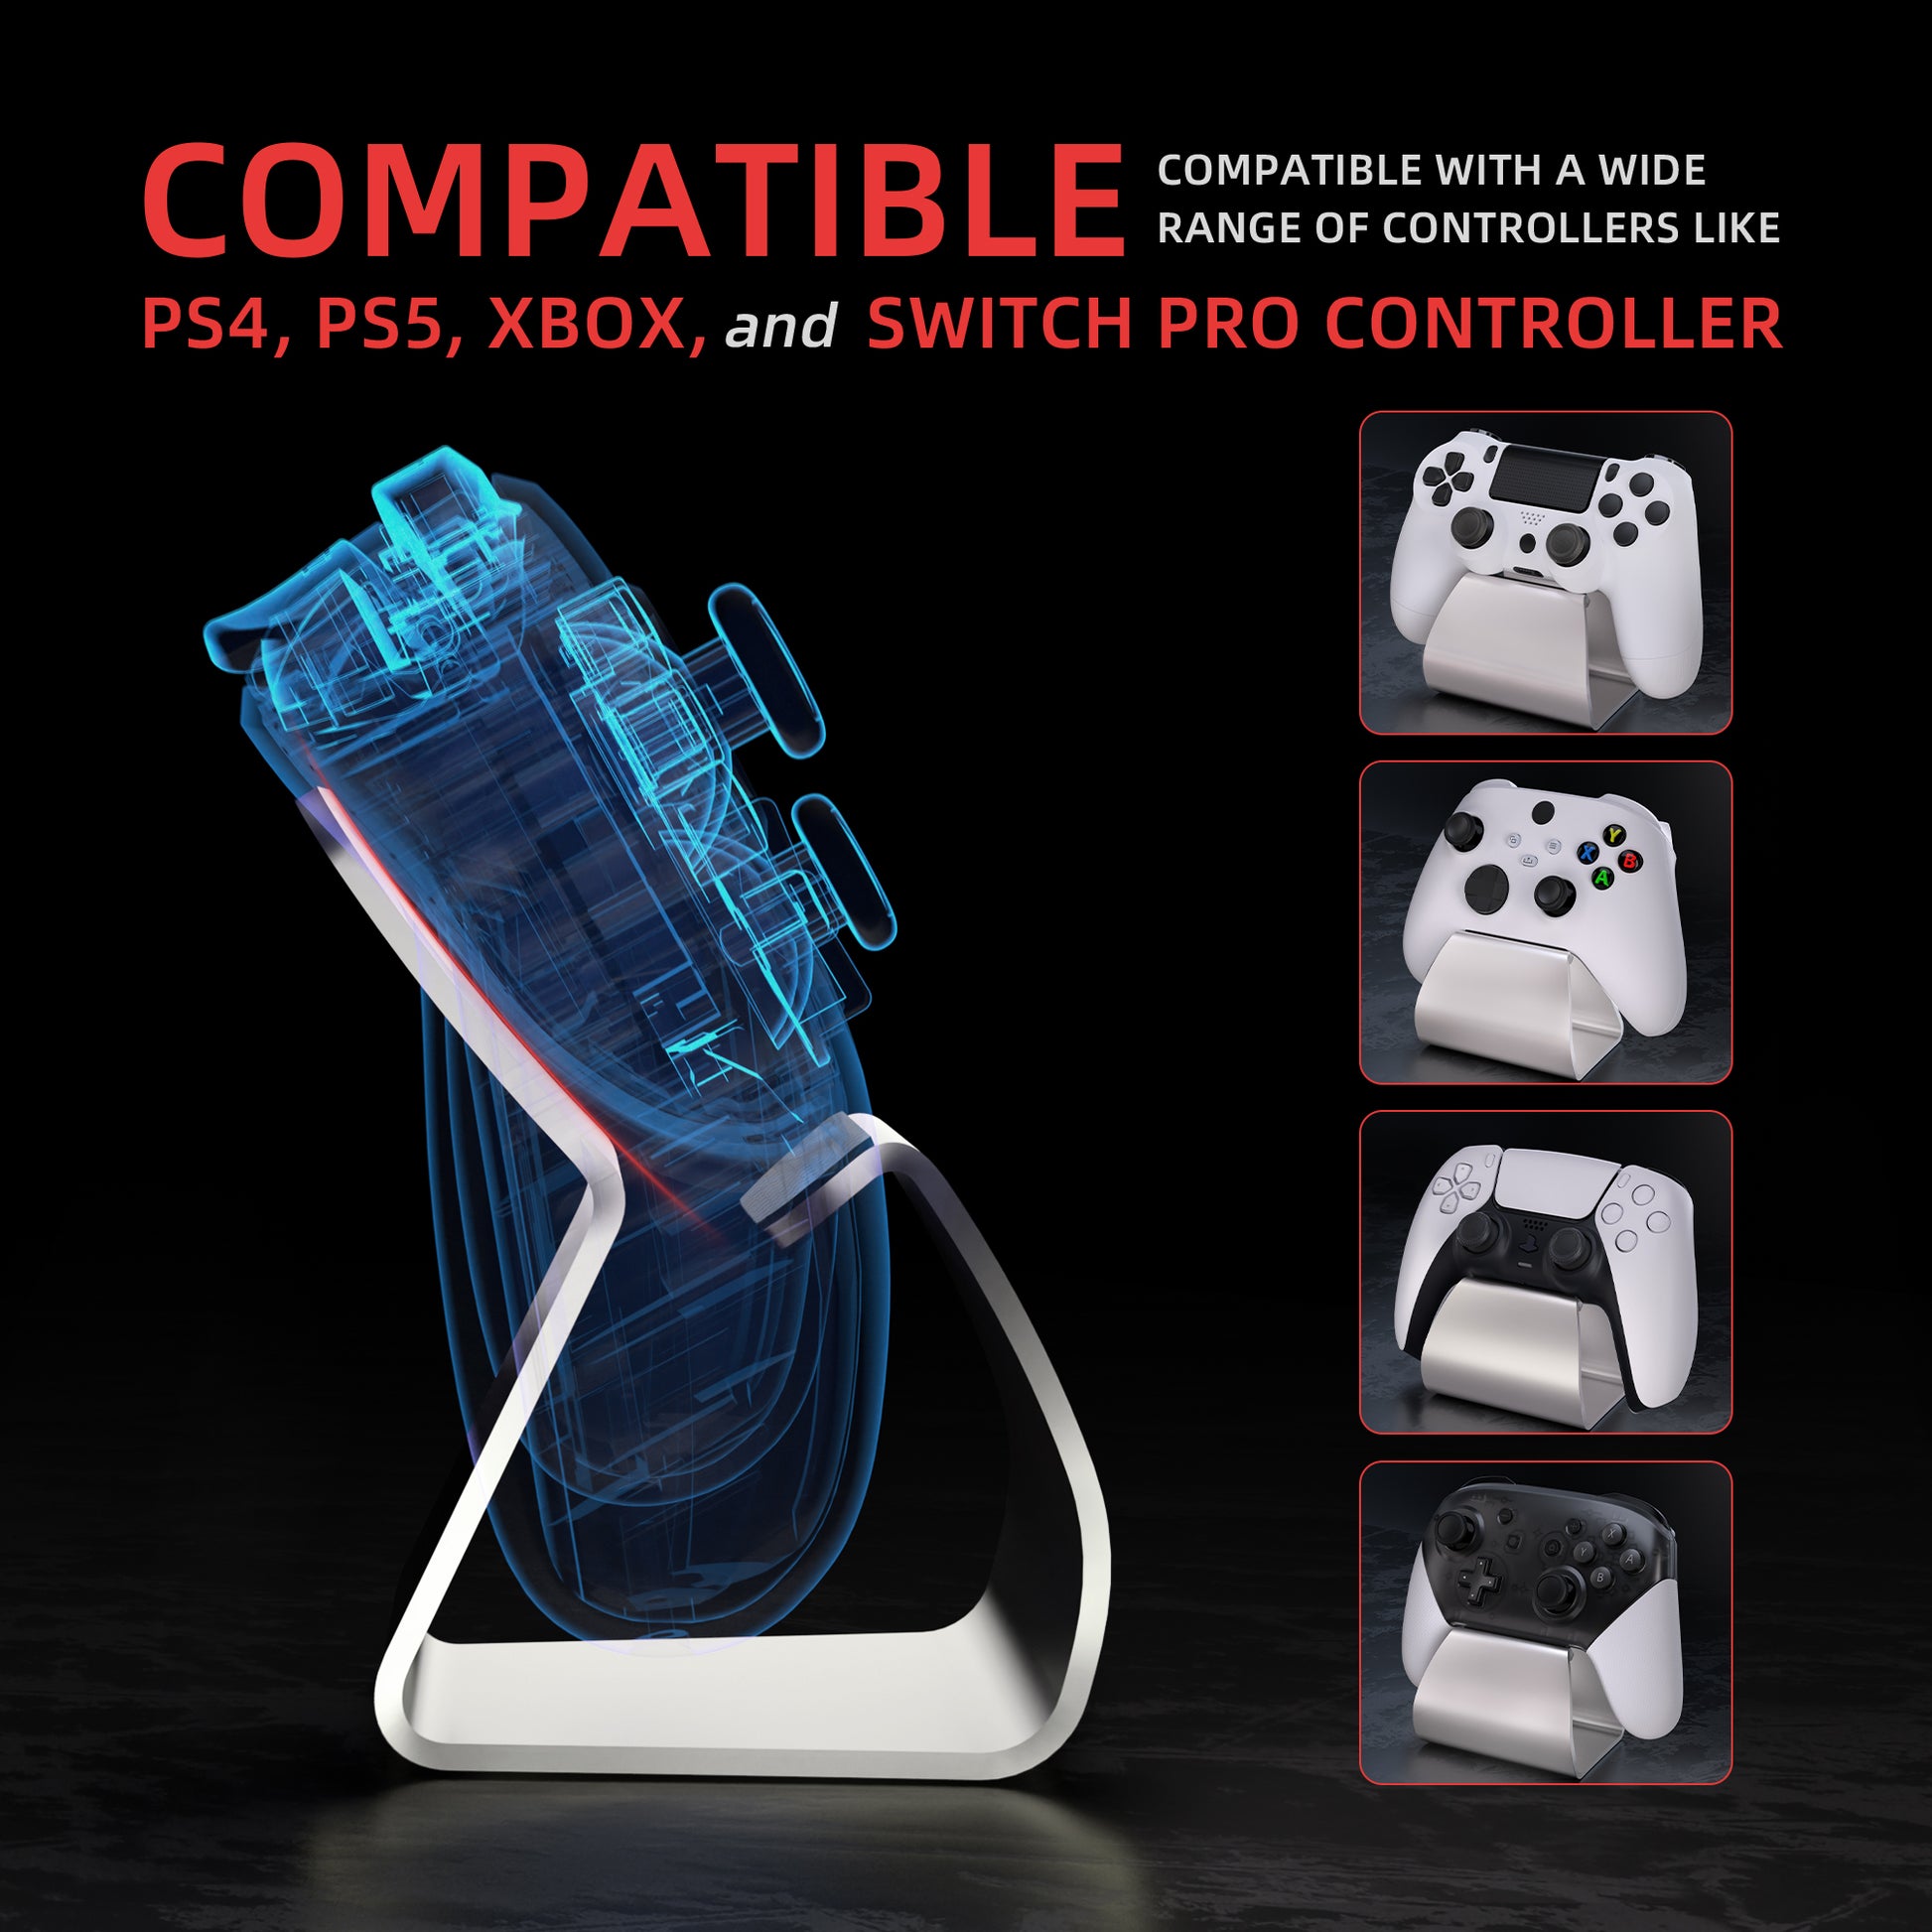 PlayVital Stand-AL Universal Metal Game Controller Stand for PS5 & PS4 & Xbox Series X/S & Xbox One - Silver - FQZPFC002 PlayVital